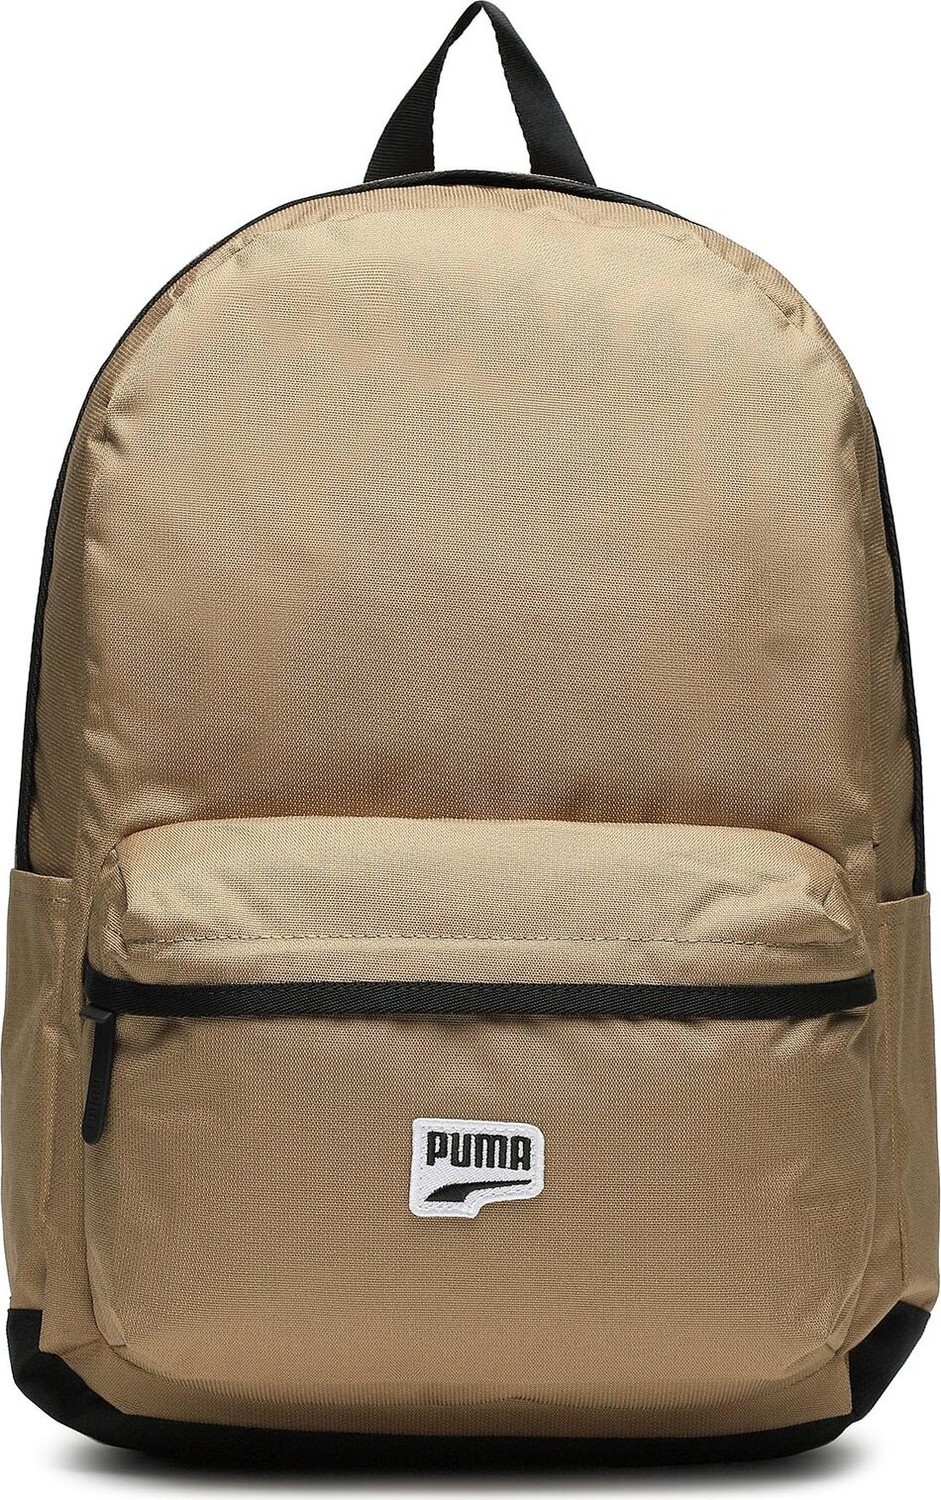 Batoh Puma Downtown Backpack Toasted 079659 04 Toasted